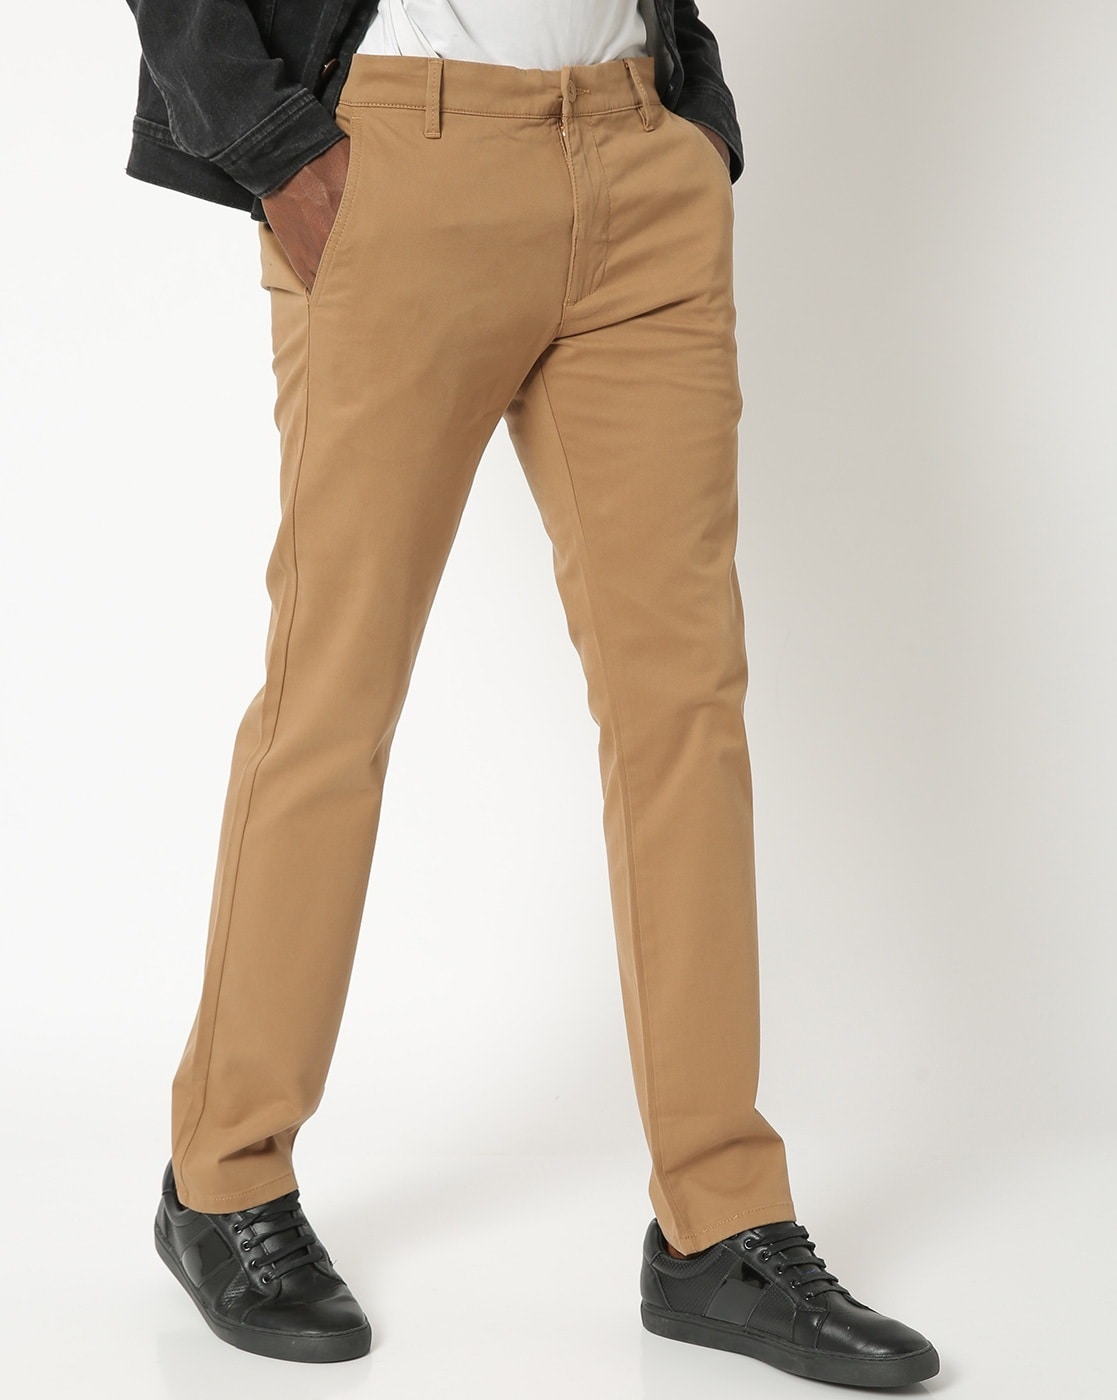 River Island Textured Tapered Trousers - Navy | very.co.uk